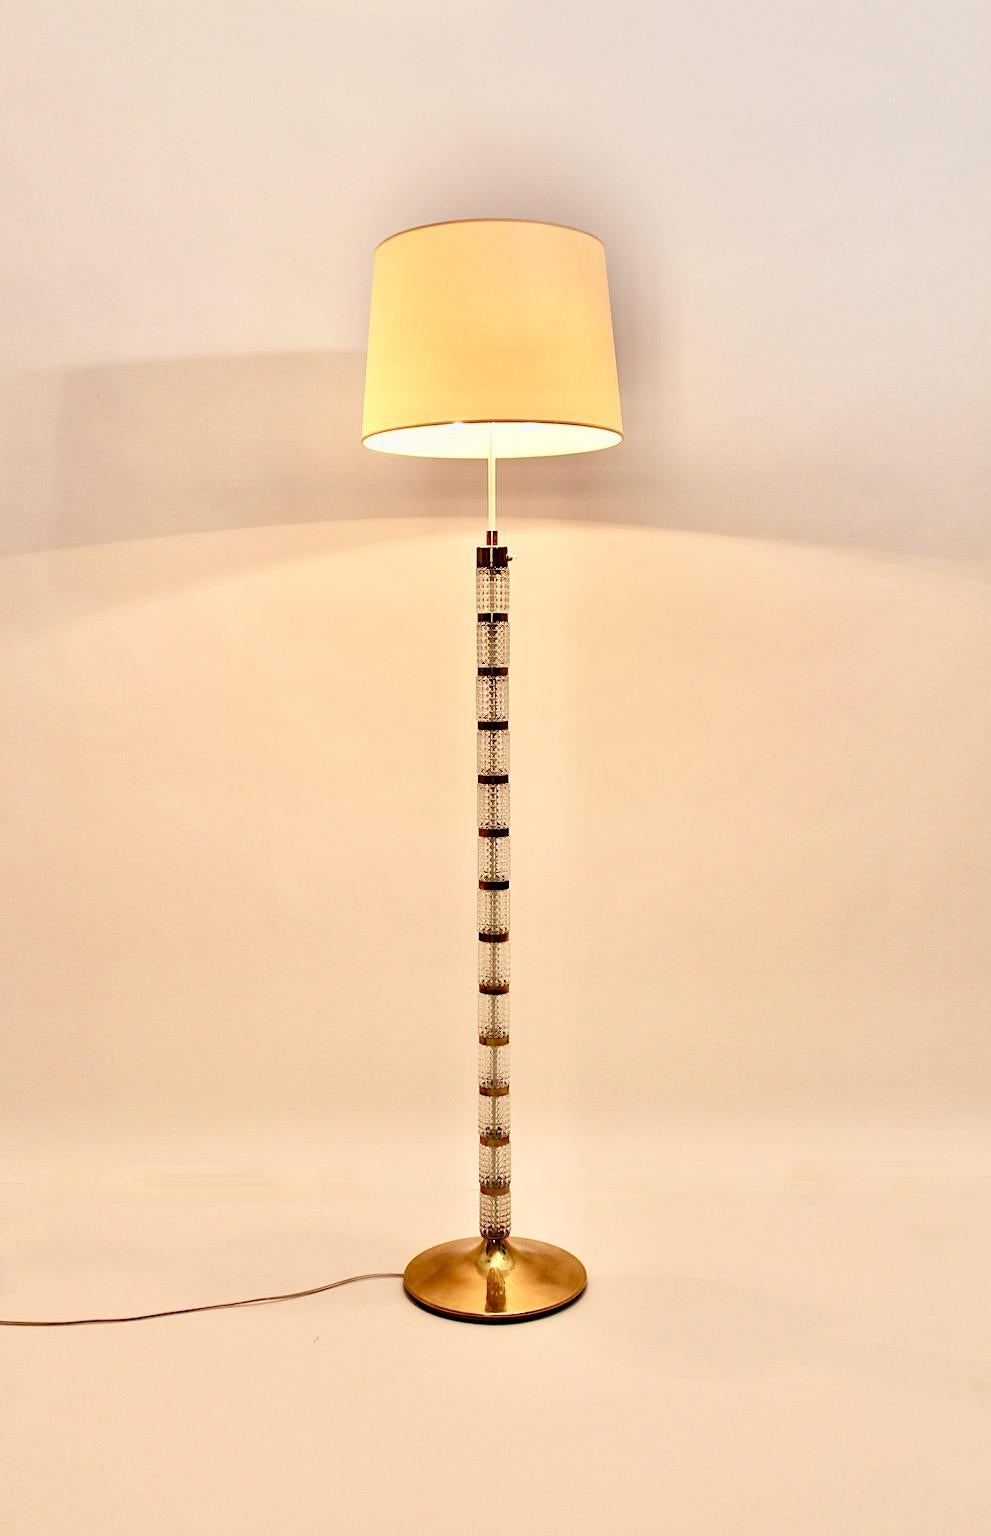 Mid-Century Modern Vintage Brass Glass Floor Lamp Richard Essig 1960s Germany In Good Condition For Sale In Vienna, AT